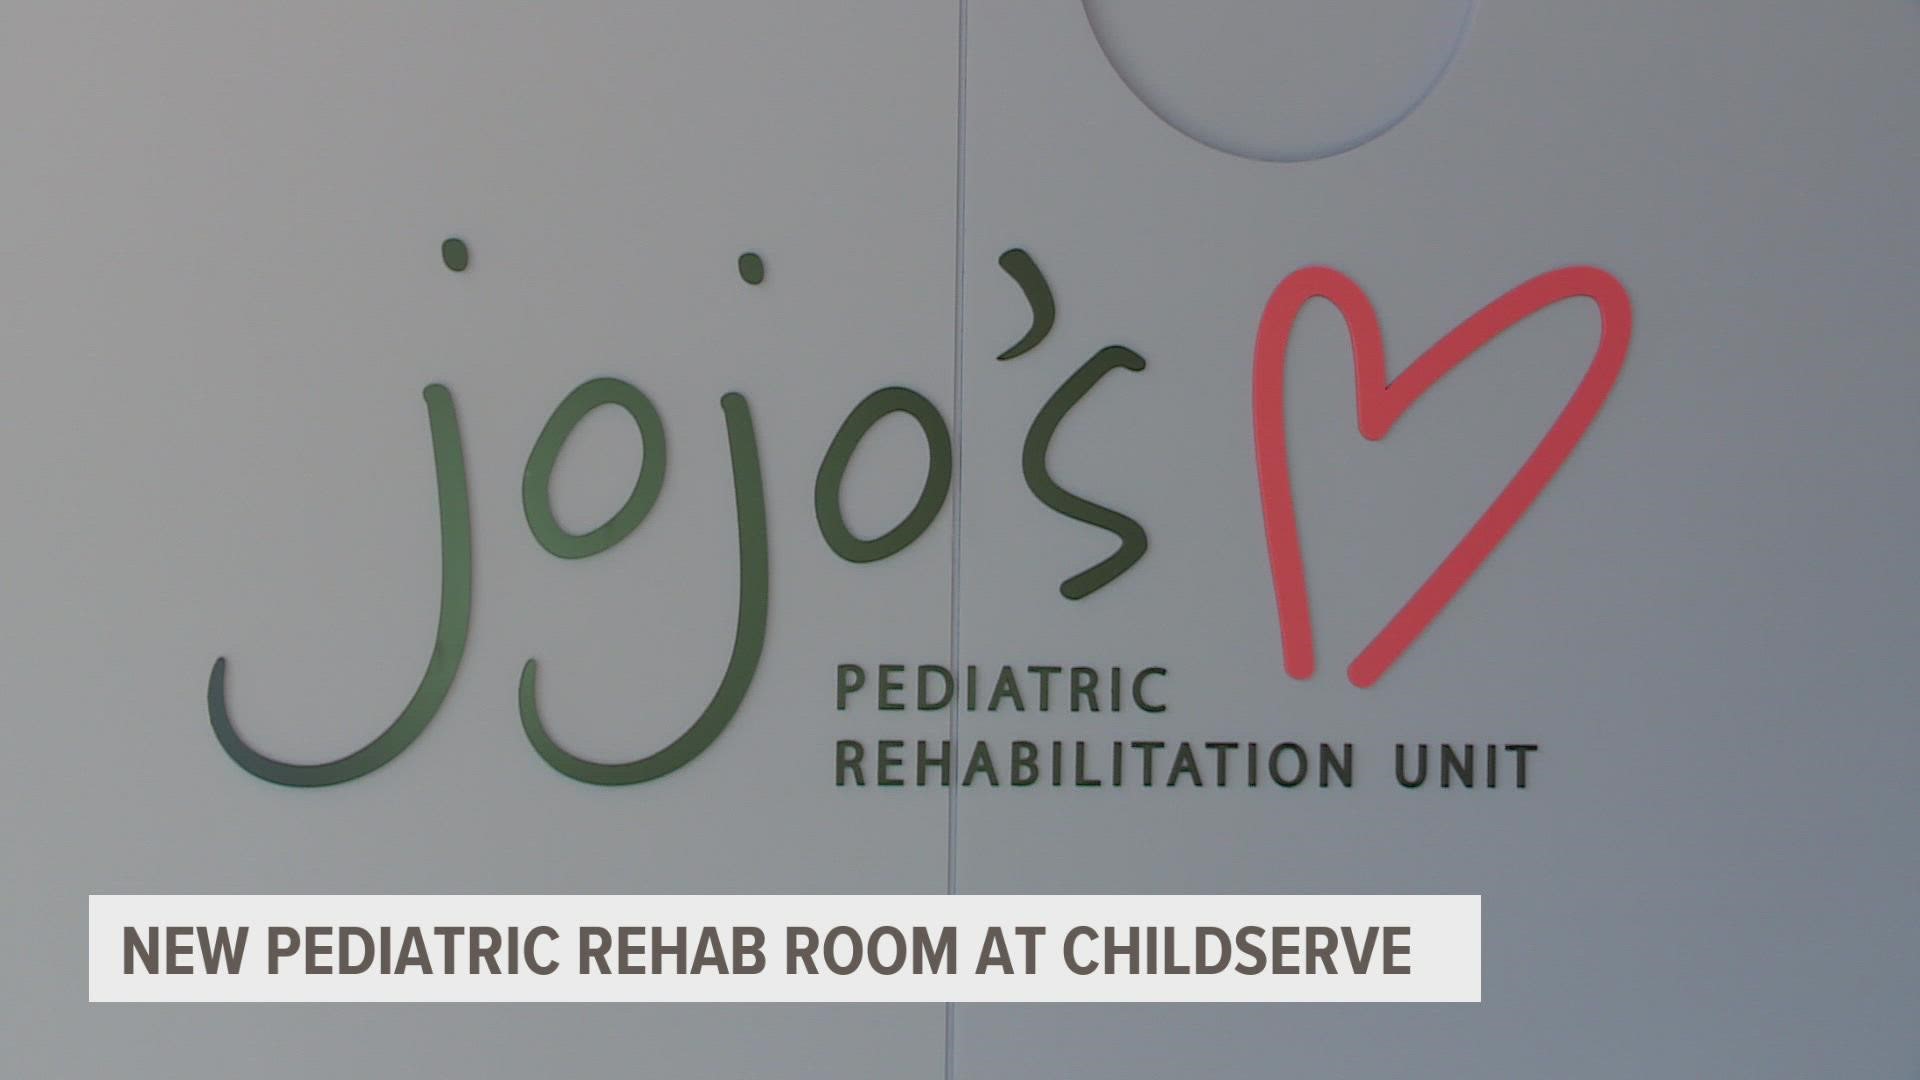 JoJo's Pediatric Rehabilitation Unit is designed to adapt treatments and environments to meet a child's individual needs and age.